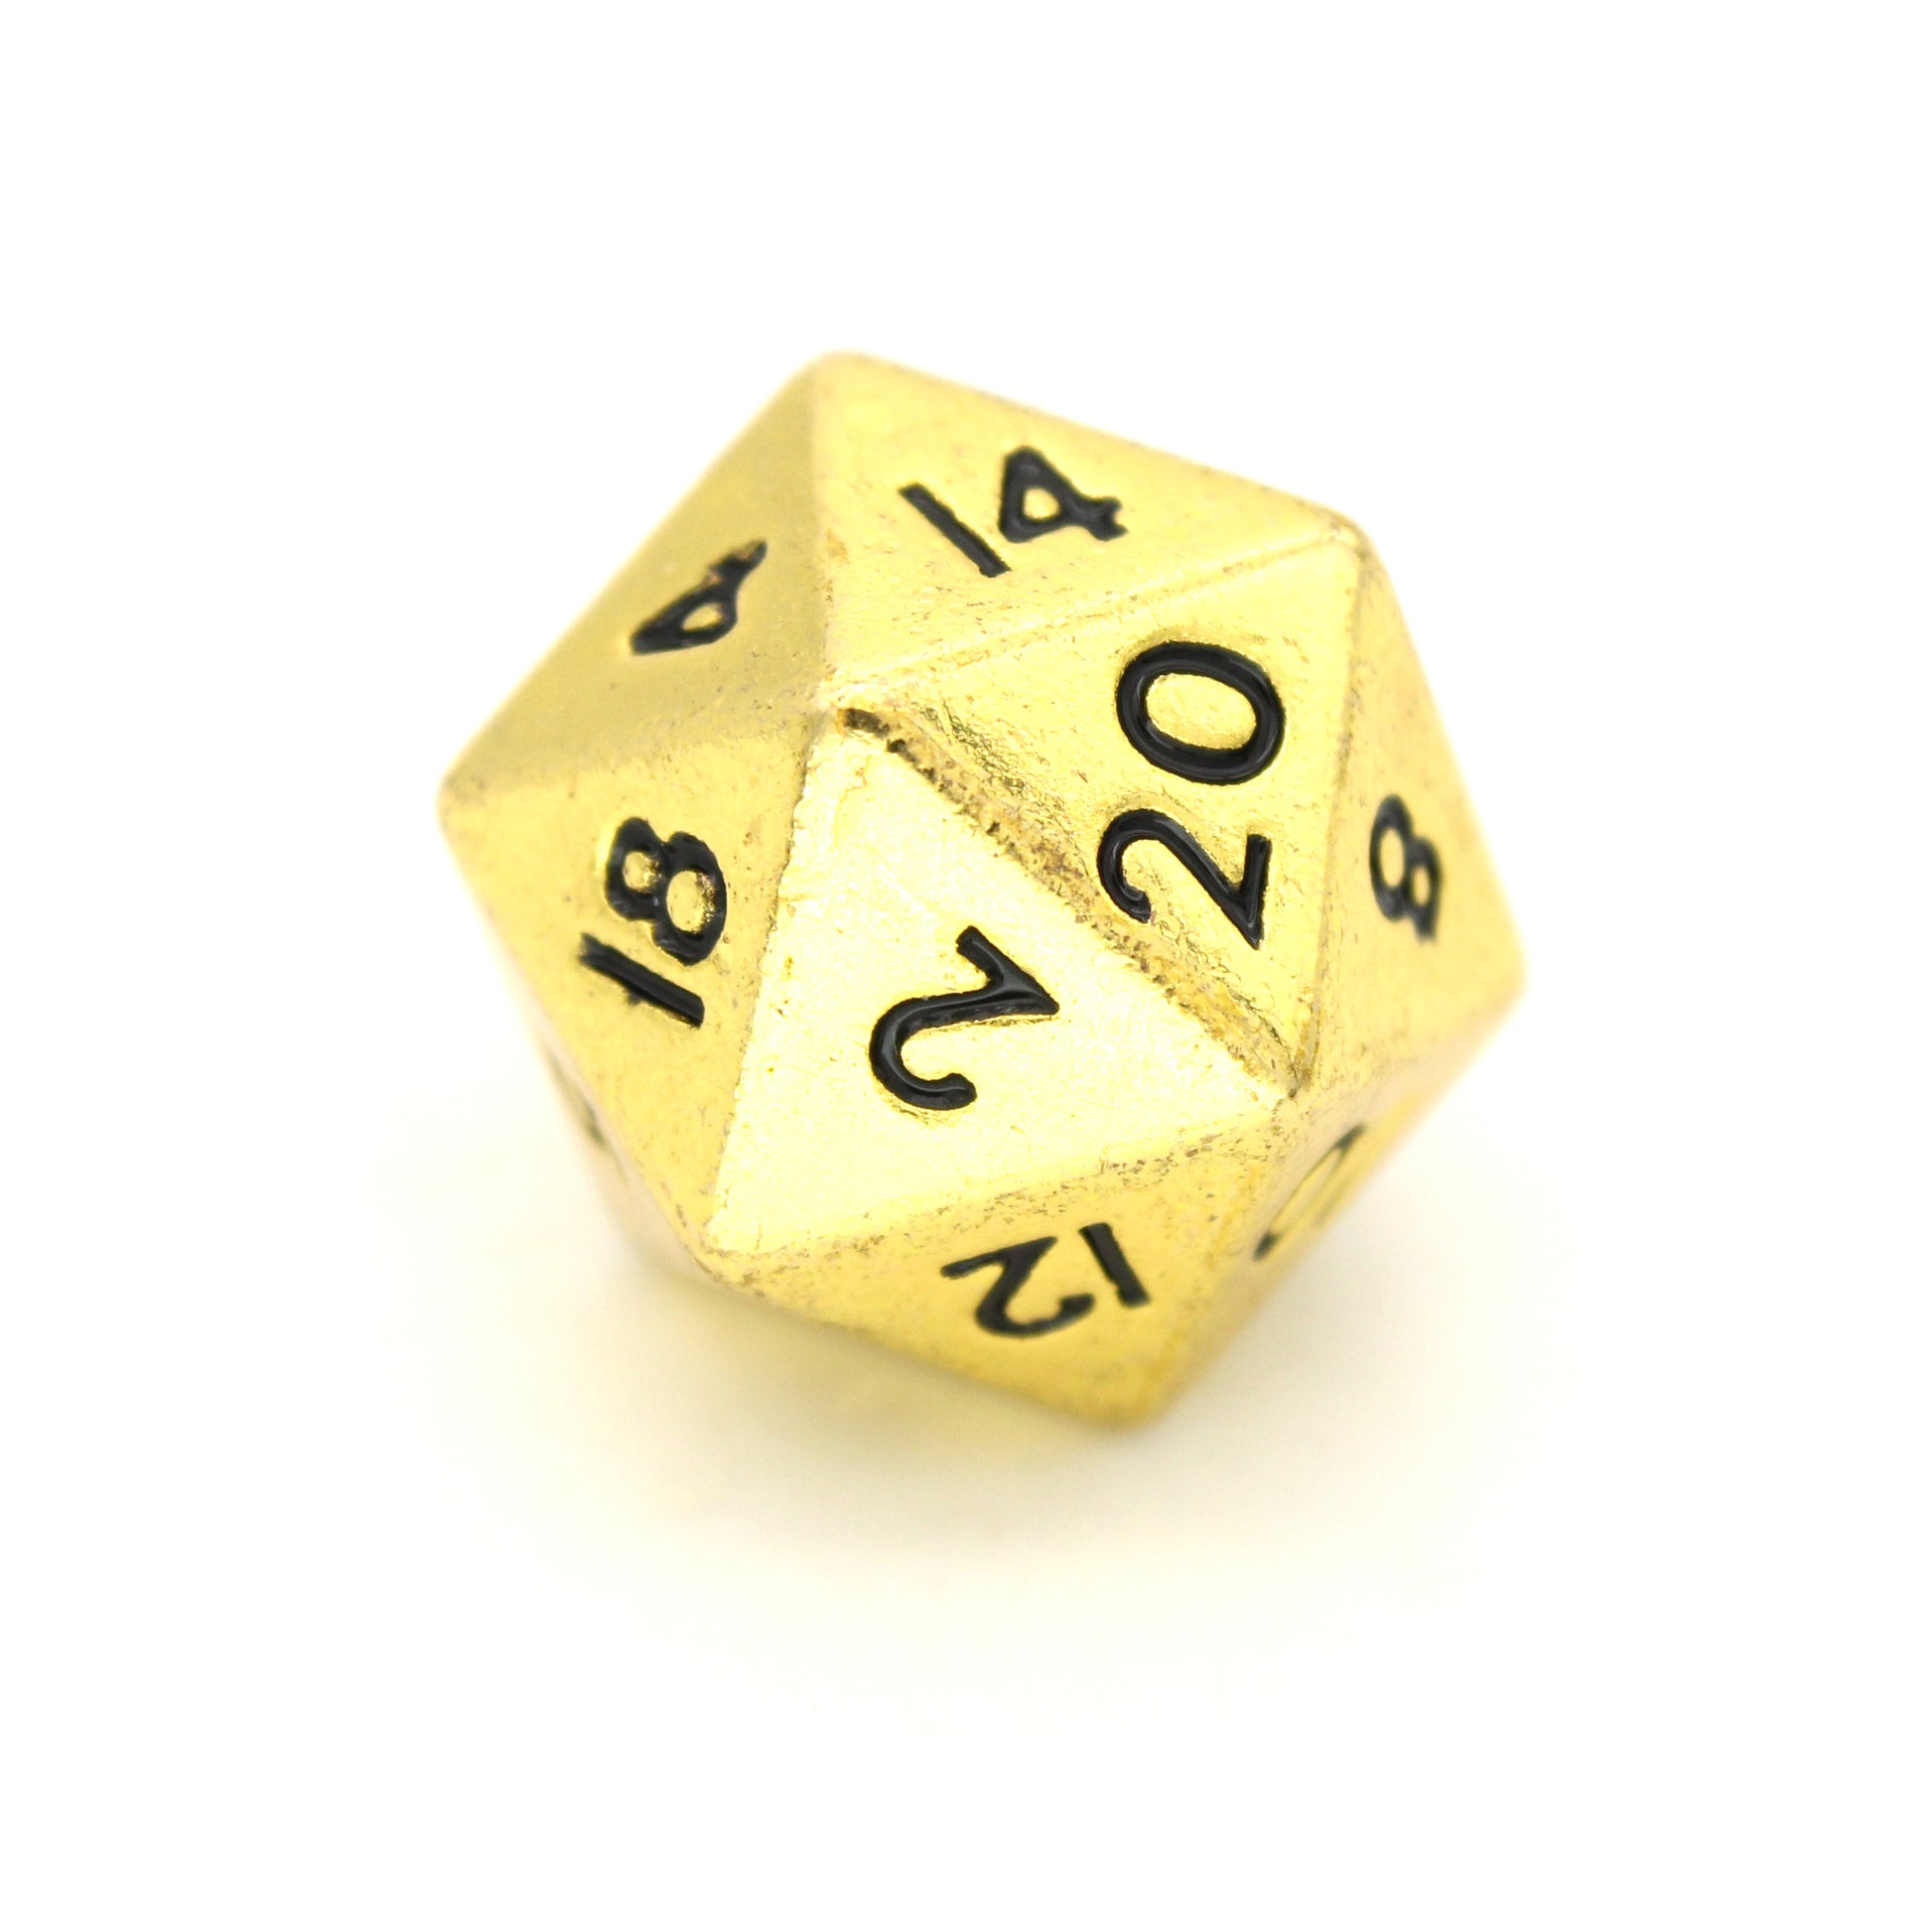 Ankle Biters is a 7-piece set of shiny gold 10mm metal dice.